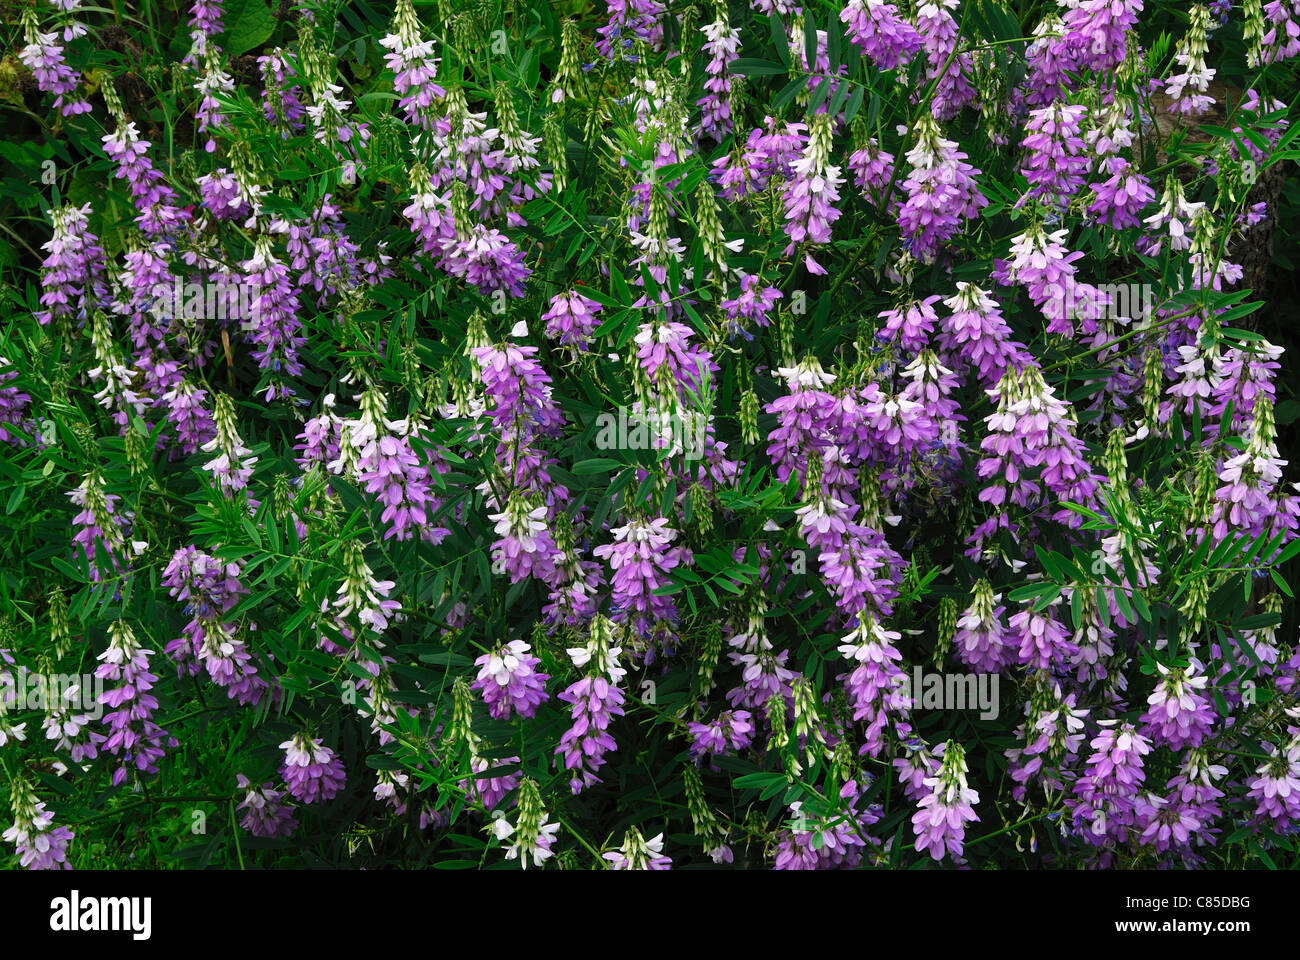 The purple flowers and green foliage of goat's rue, making a pattern Stock Photo